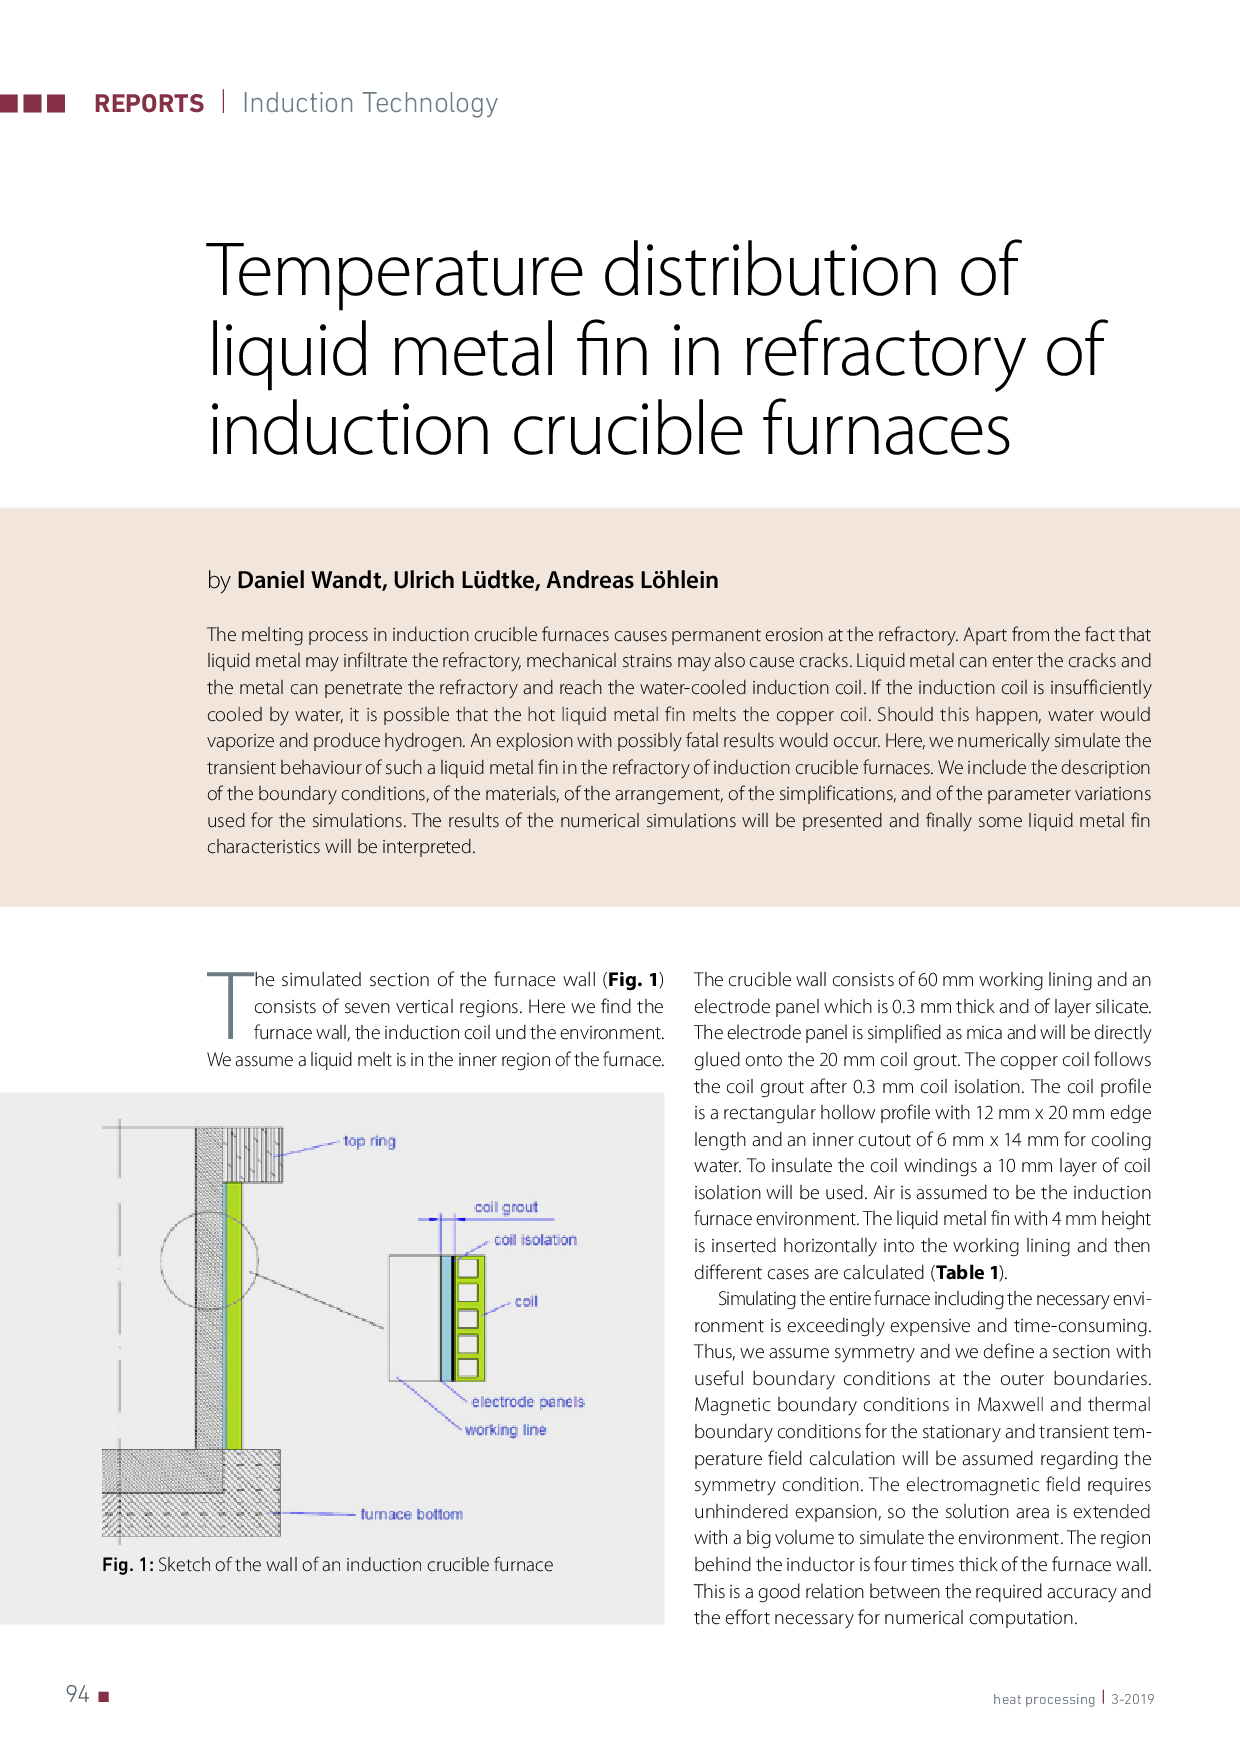 Temperature distribution of liquid metal fin in refractory of induction crucible furnaces